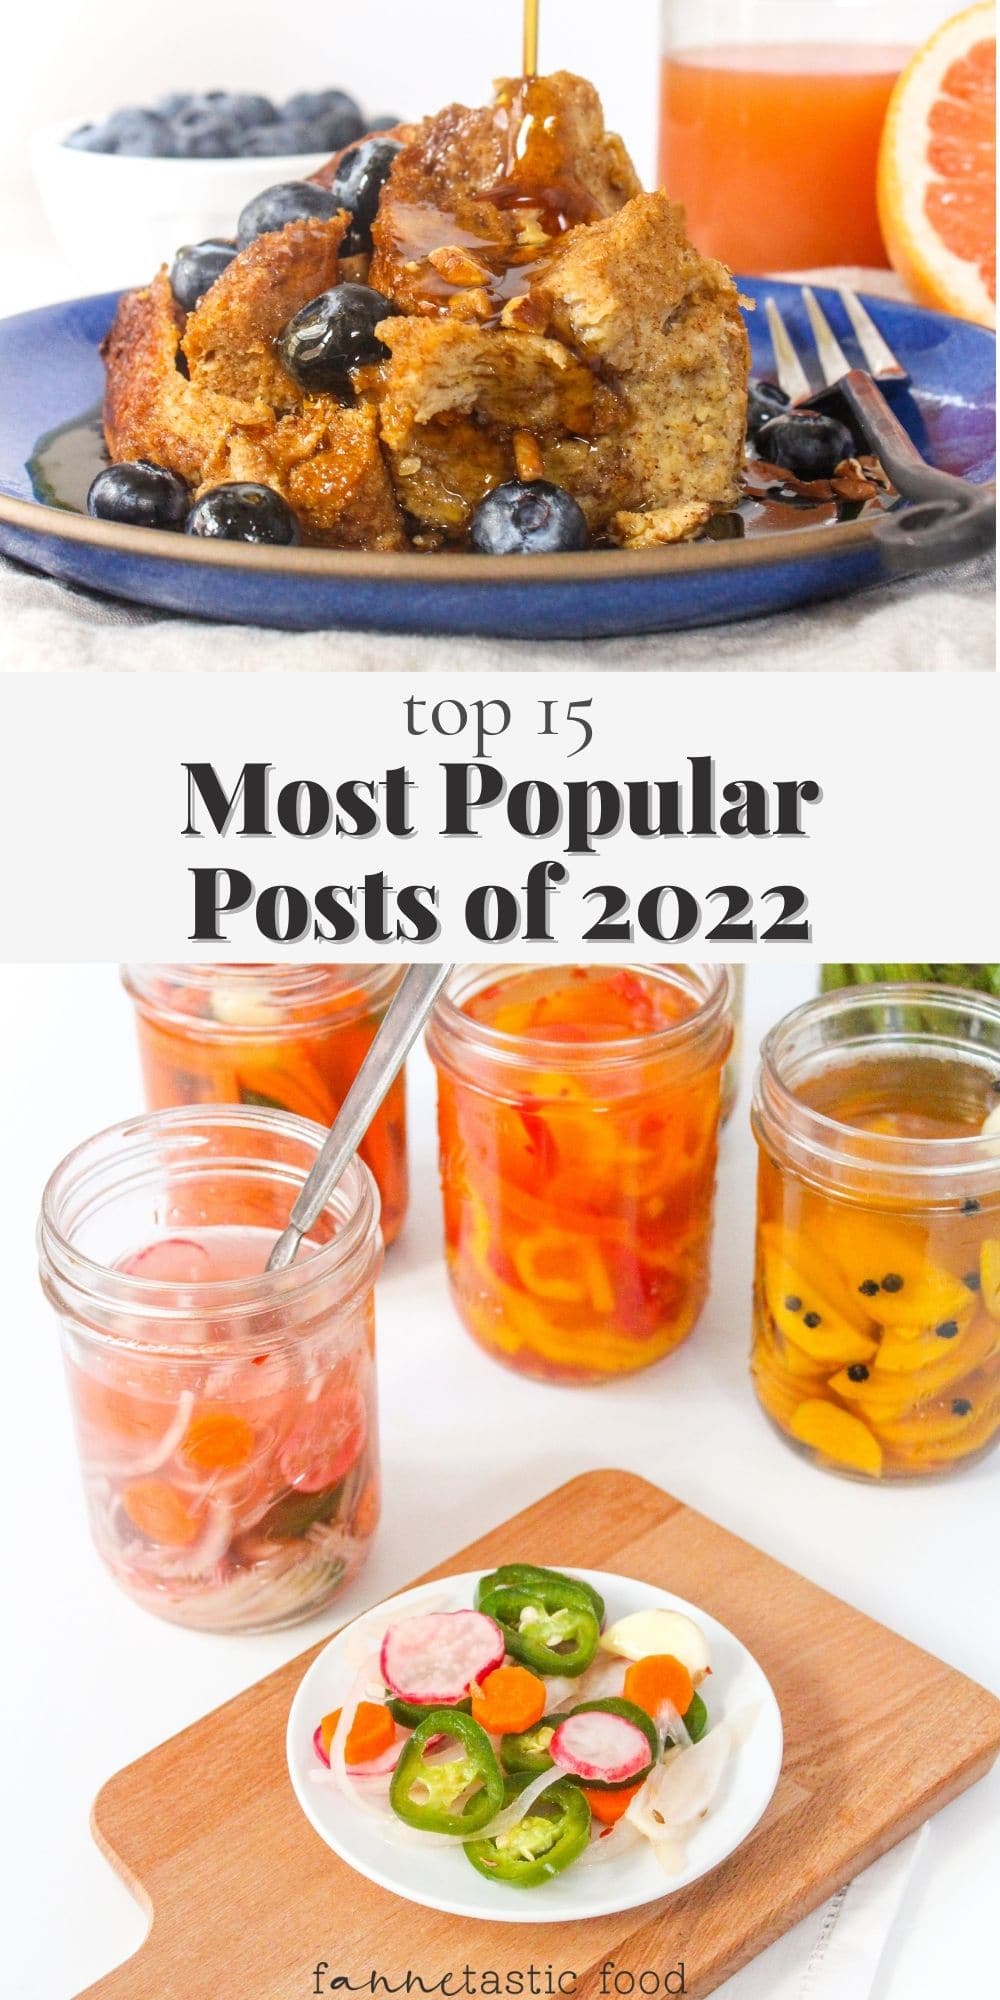 top posts of 2022 on the fannetastic food blog